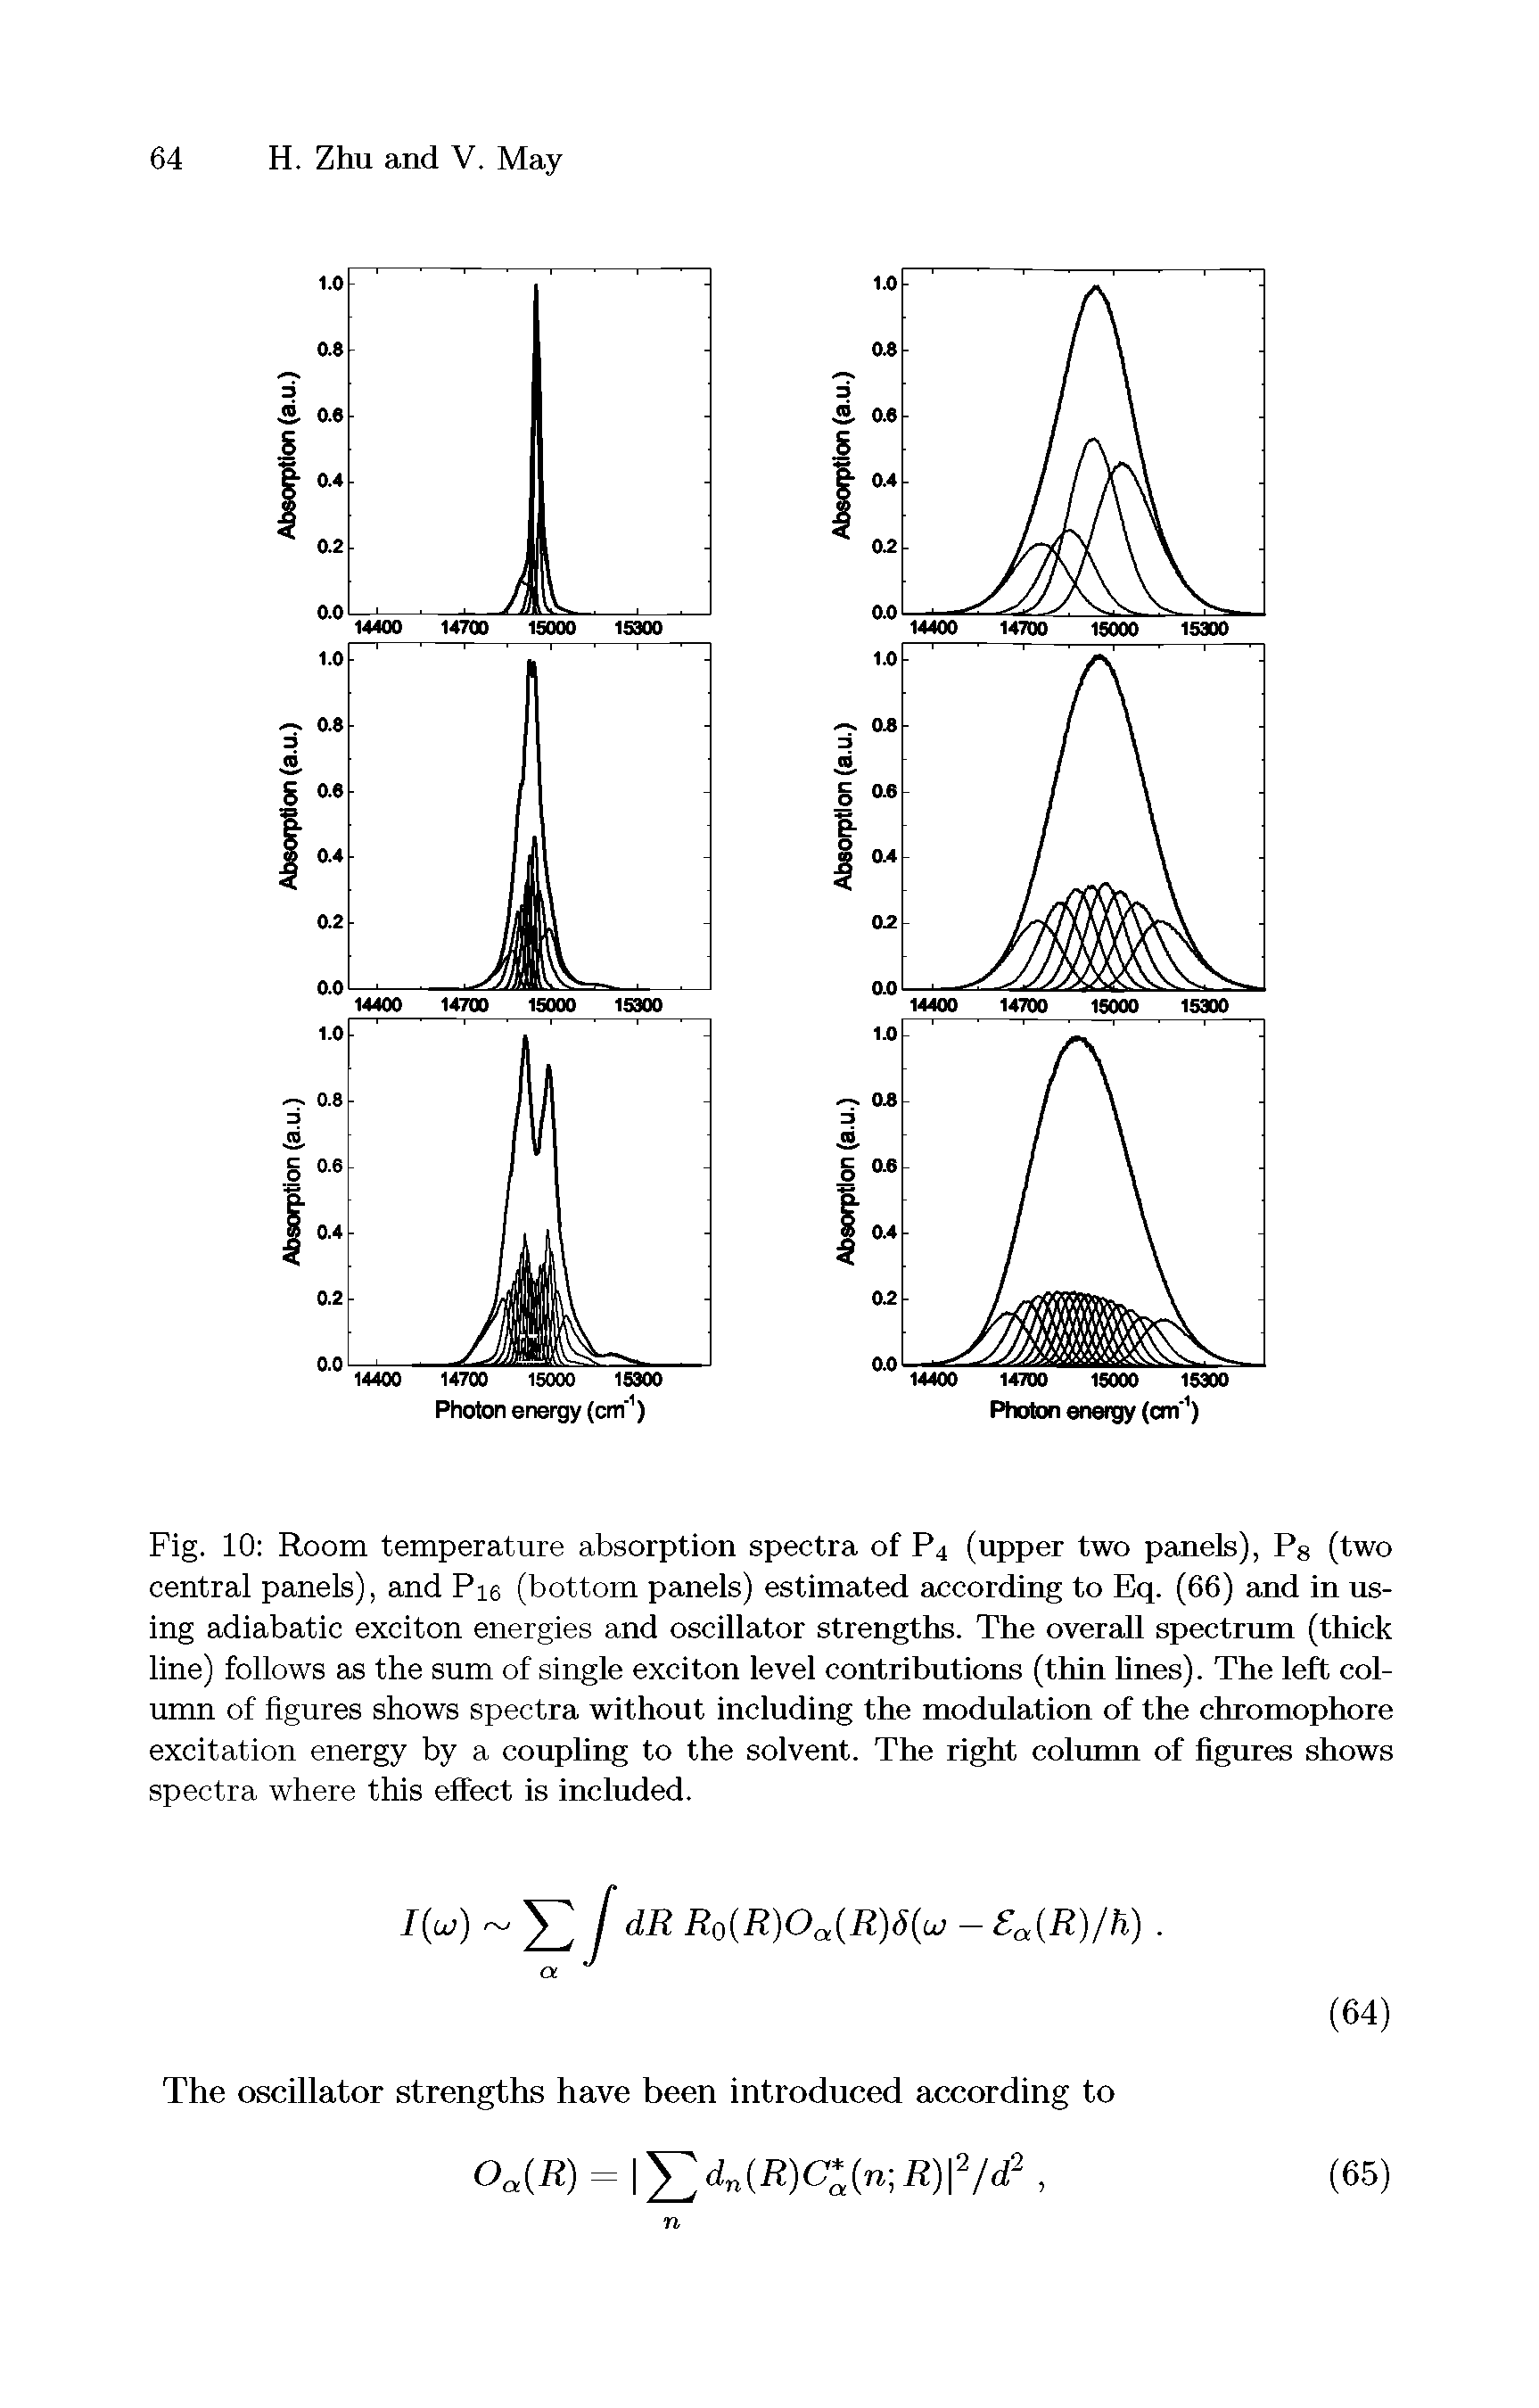 Fig. 10 Room temperature absorption spectra of P4 (upper two panels), P8 (two central panels), and Pi6 (bottom panels) estimated according to Eq. (66) and in using adiabatic exciton energies and oscillator strengths. The overall spectrum (thick line) follows as the sum of single exciton level contributions (thin lines). The left column of figures shows spectra without including the modulation of the chromophore excitation energy by a coupling to the solvent. The right column of figures shows spectra where this effect is inciuded.